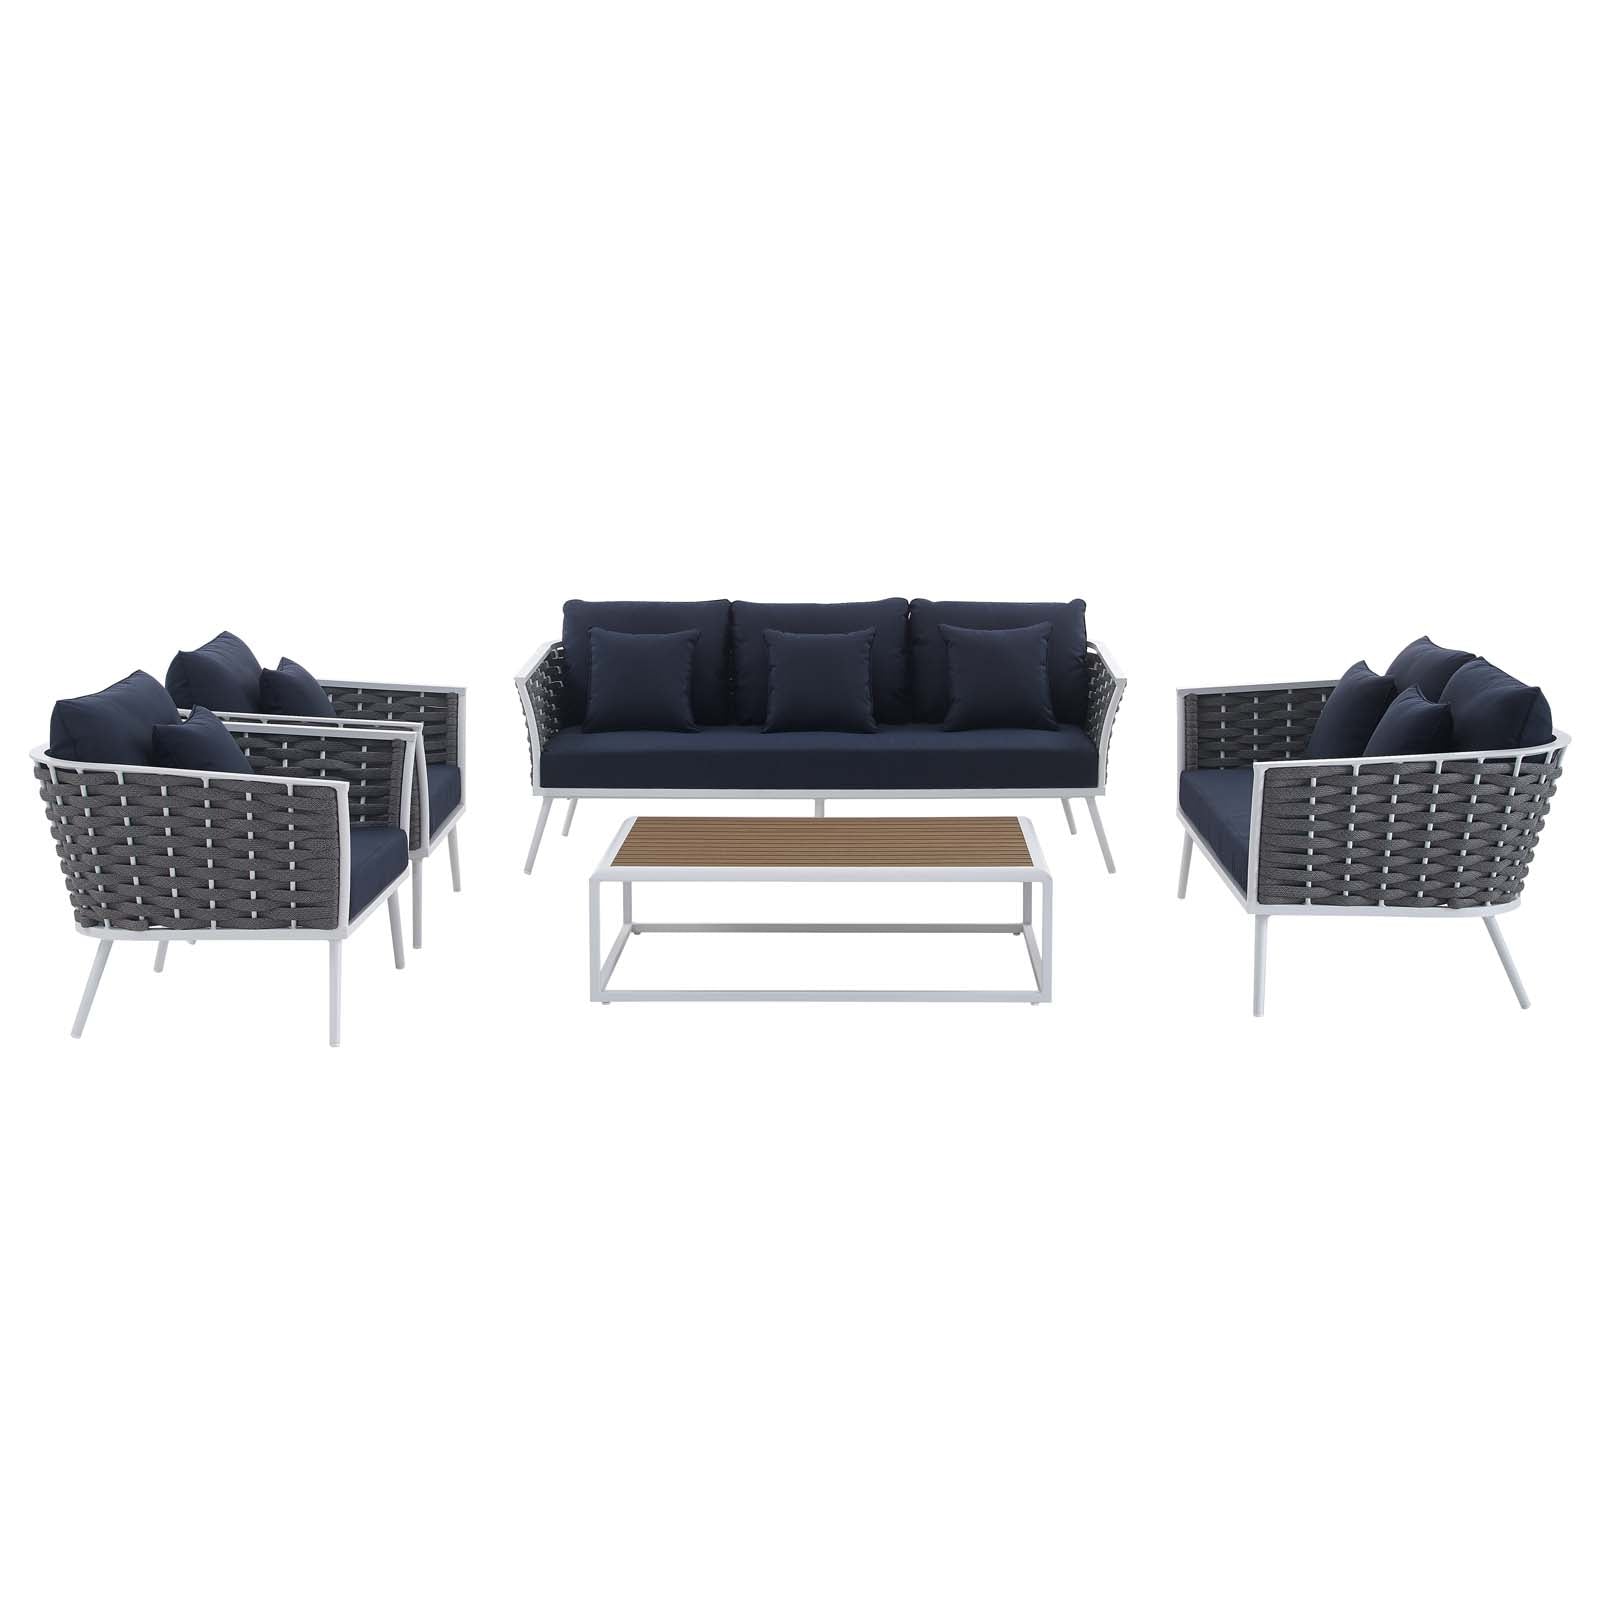 Stance 5 Piece Outdoor 139.5"W Patio Aluminum Sectional Sofa Set White